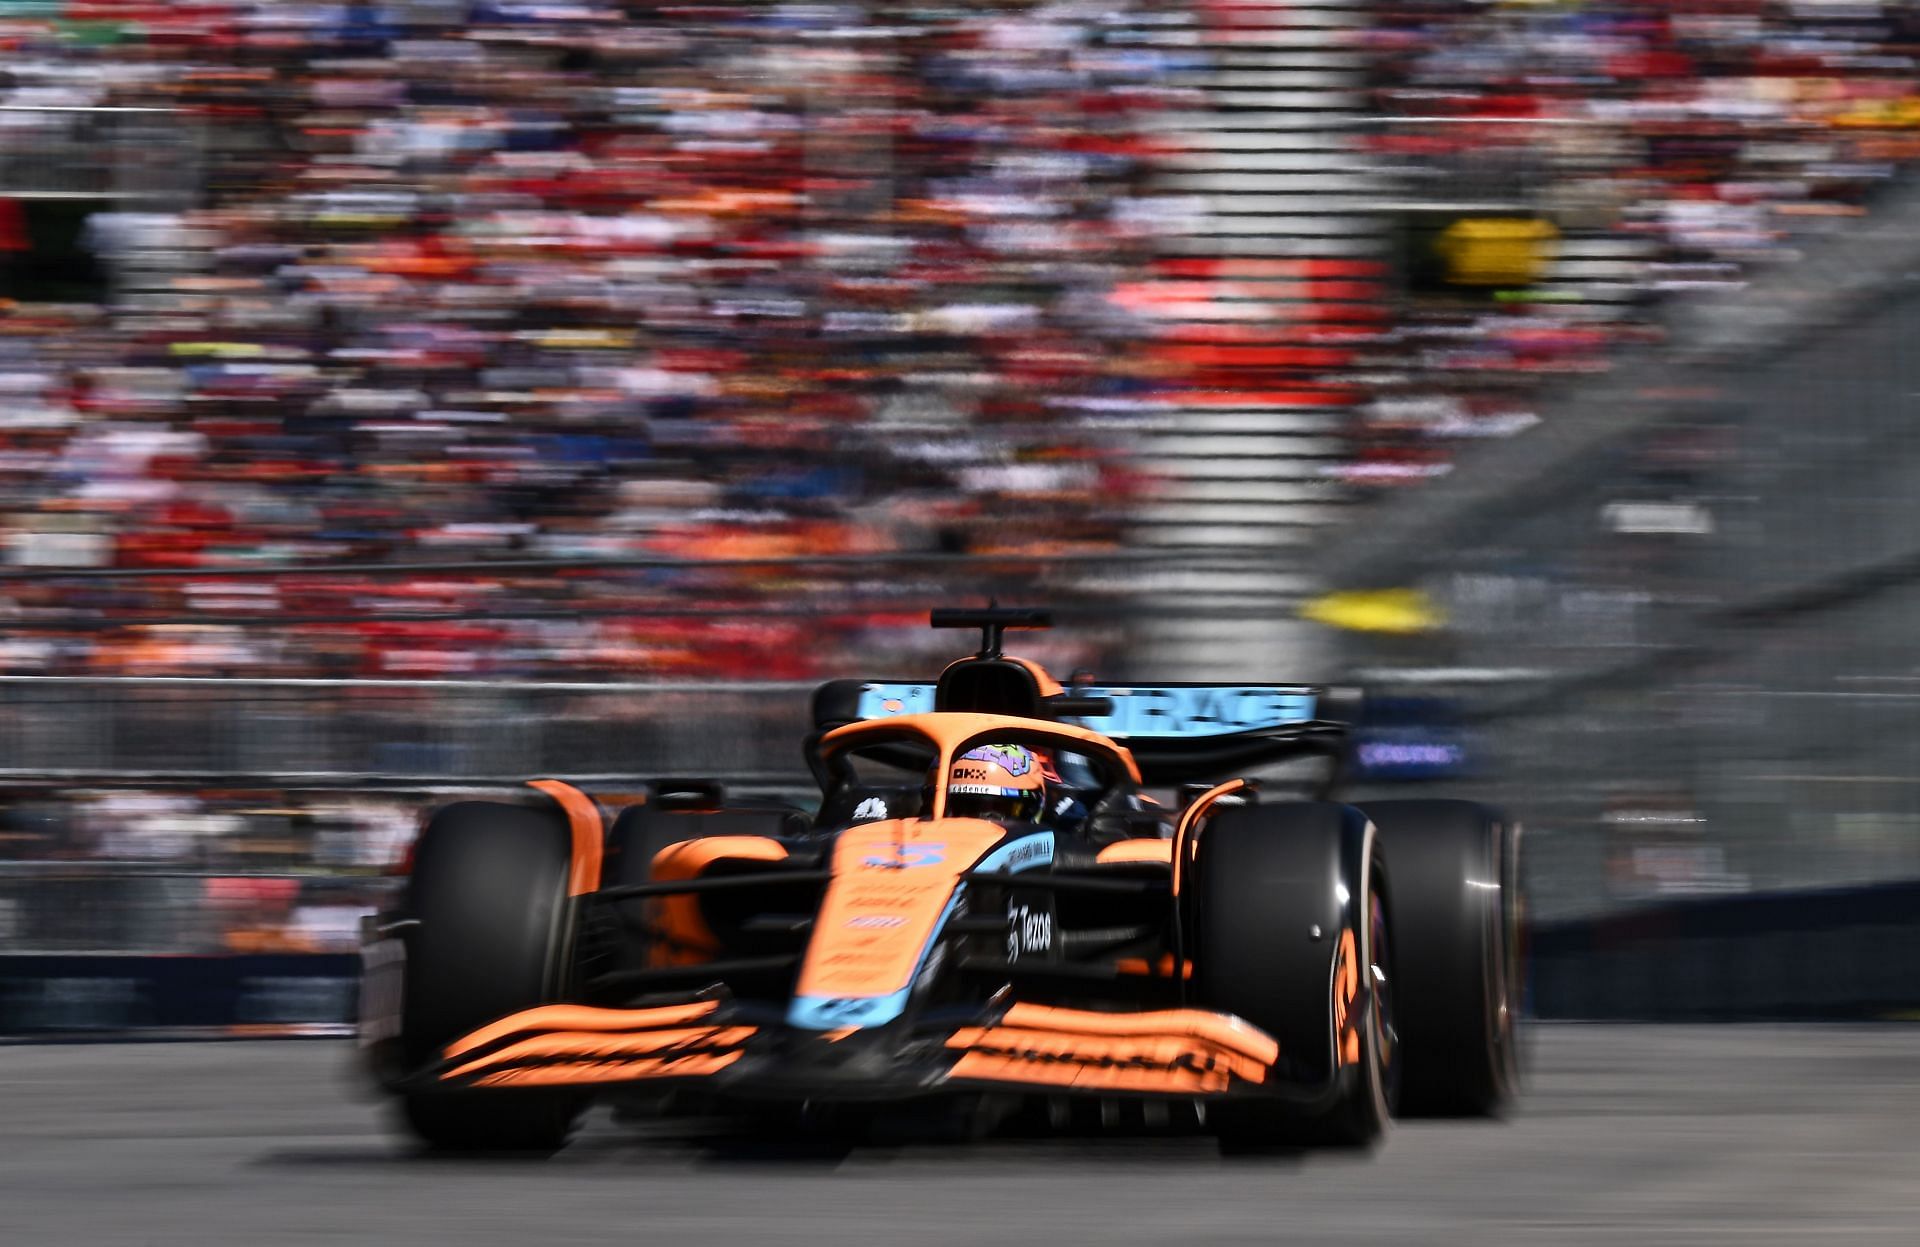 McLaren has been forced to keep the development of its 2022 F1 challenger on hold